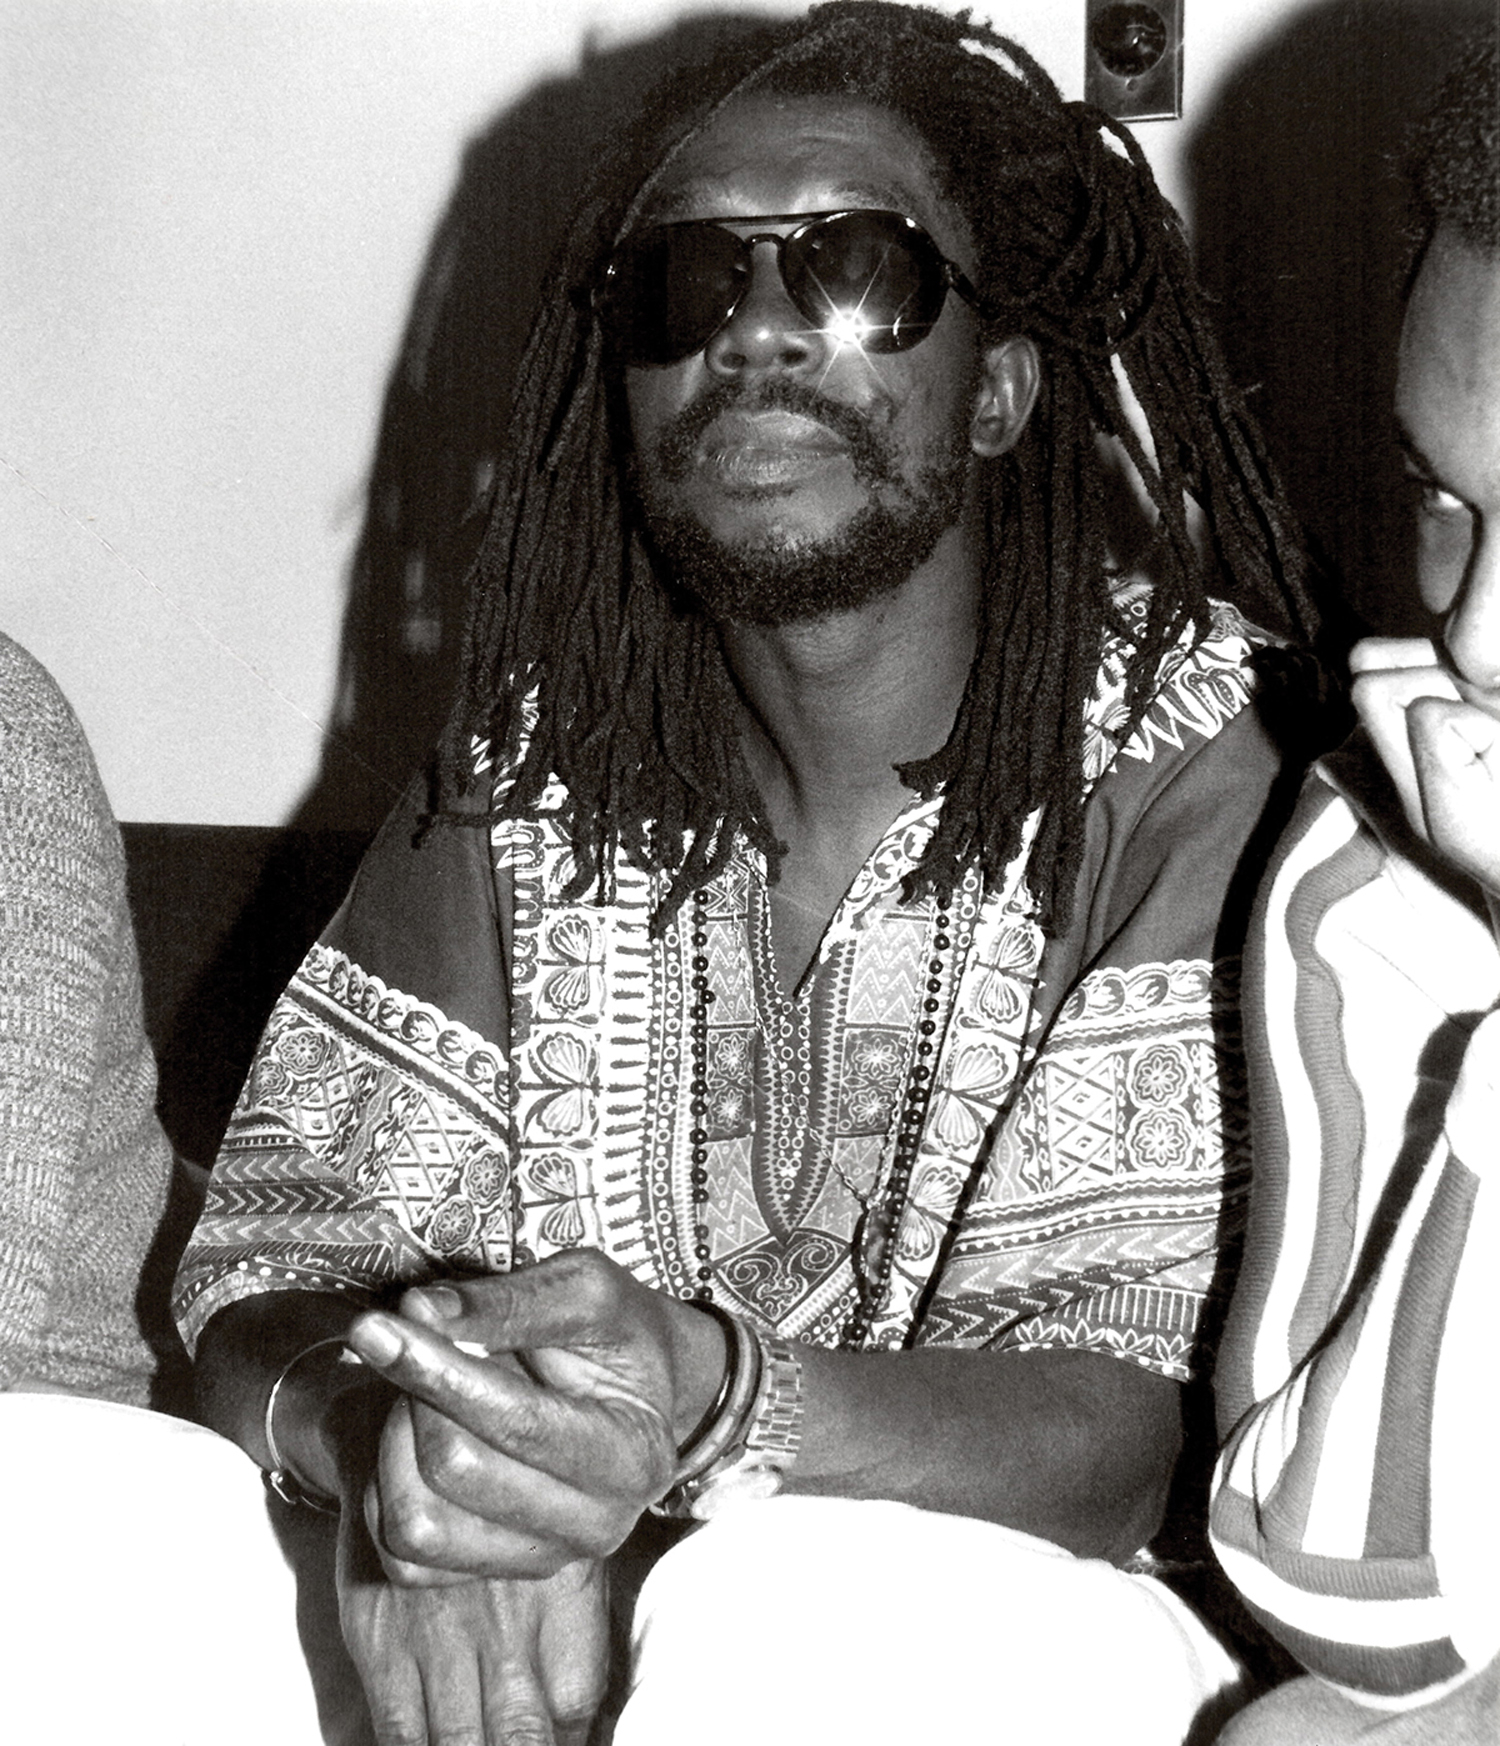     Diane Liverpool, Peter Tosh at O&#8217;Keefe Centre, 1981. Silver gelatin print, 8&#215;10&#8243;. © Diane Liverpool. 

